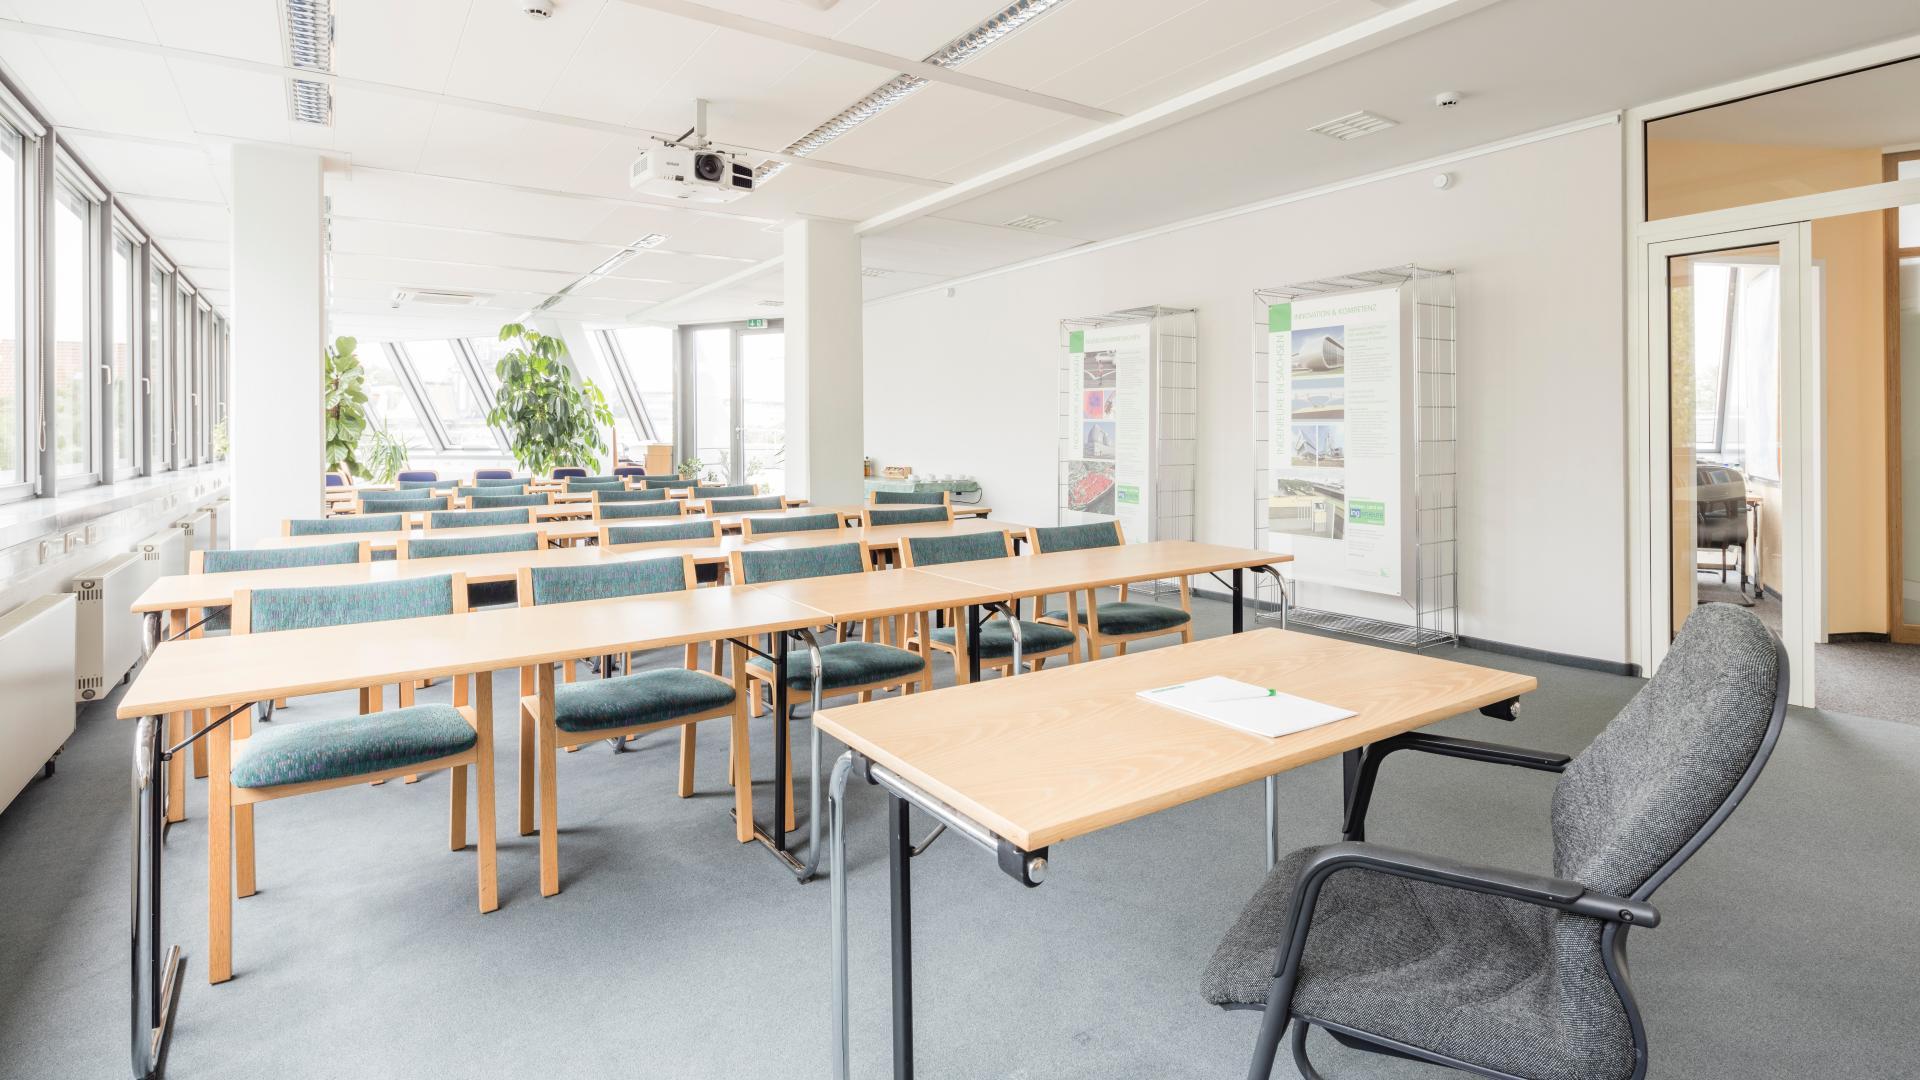 Classrooms for Hire in Leeds